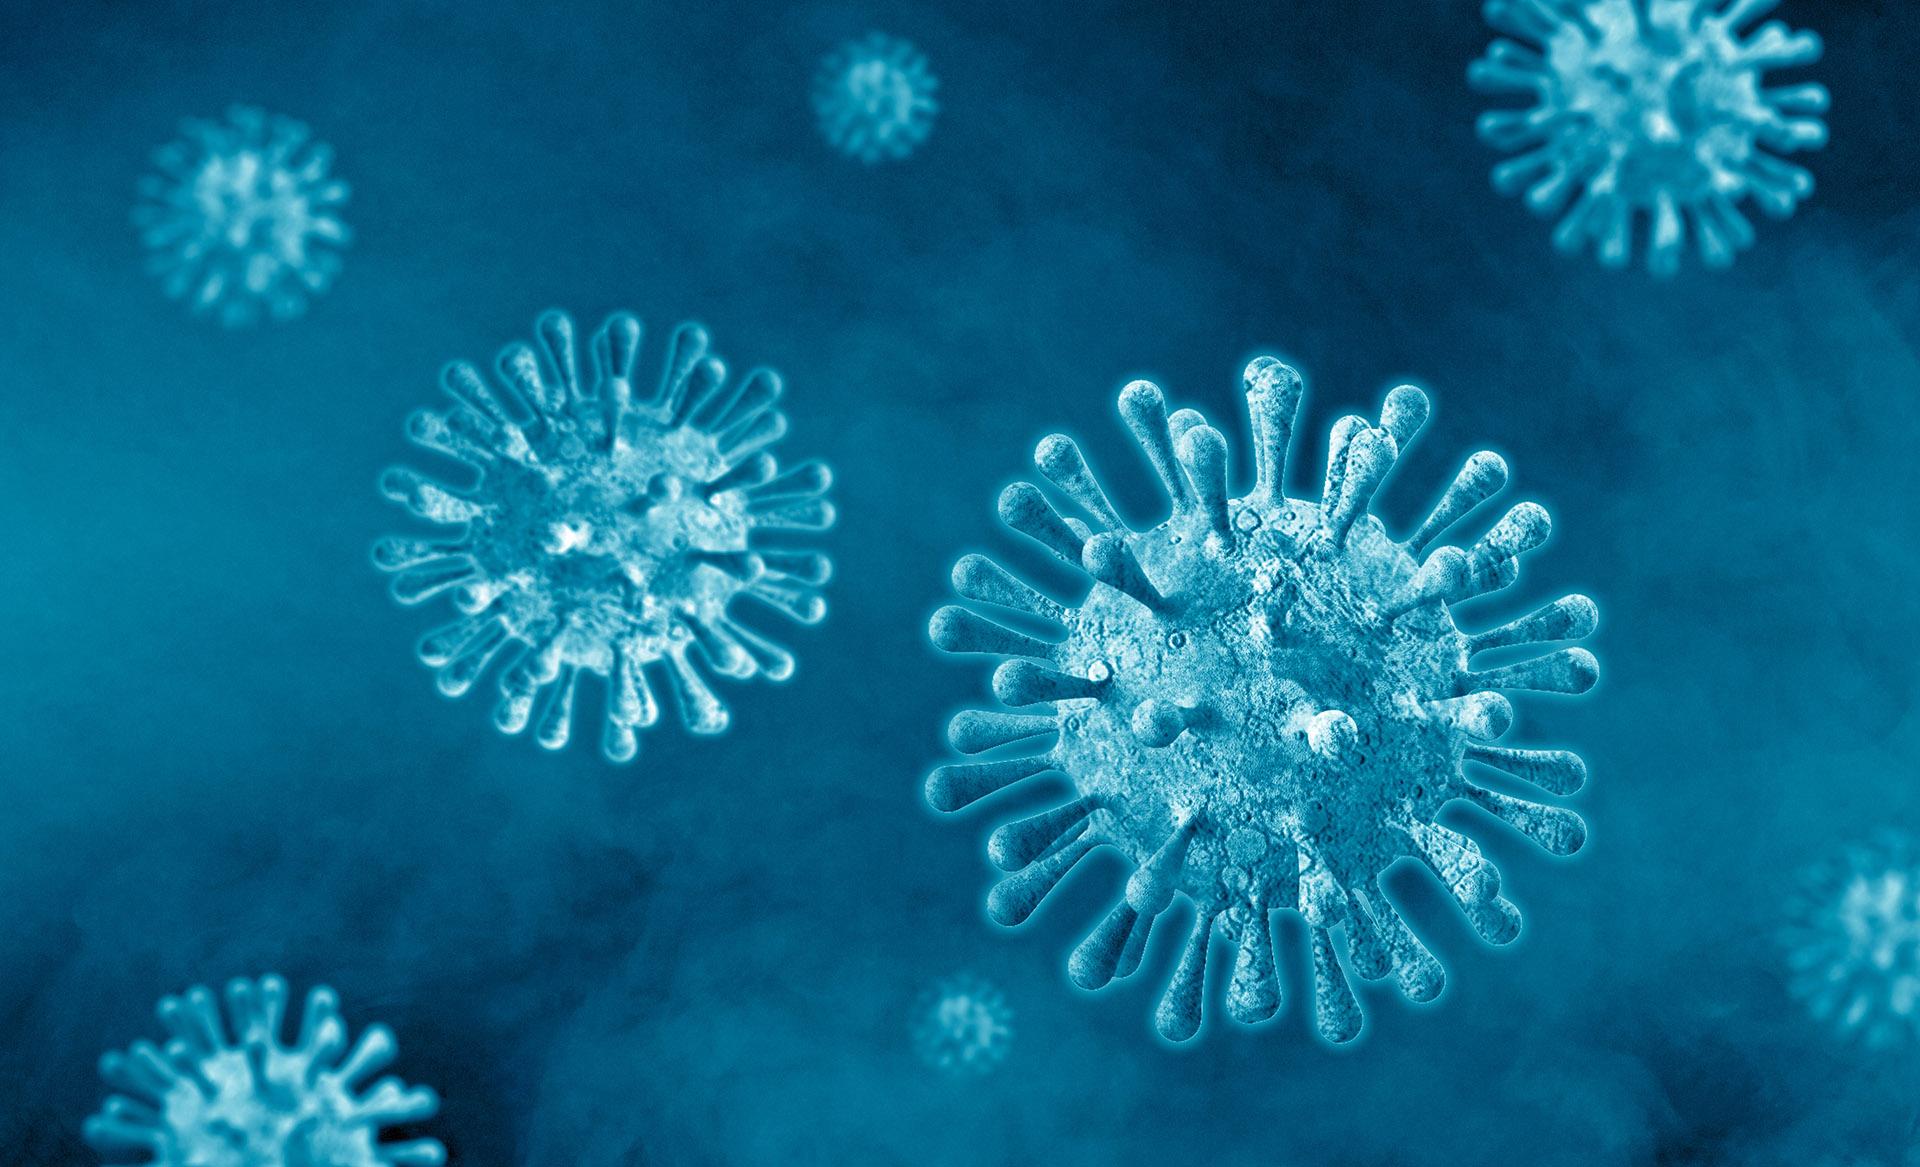 Omicron Virus: All You Need to Know About It and How to Protect Yourself